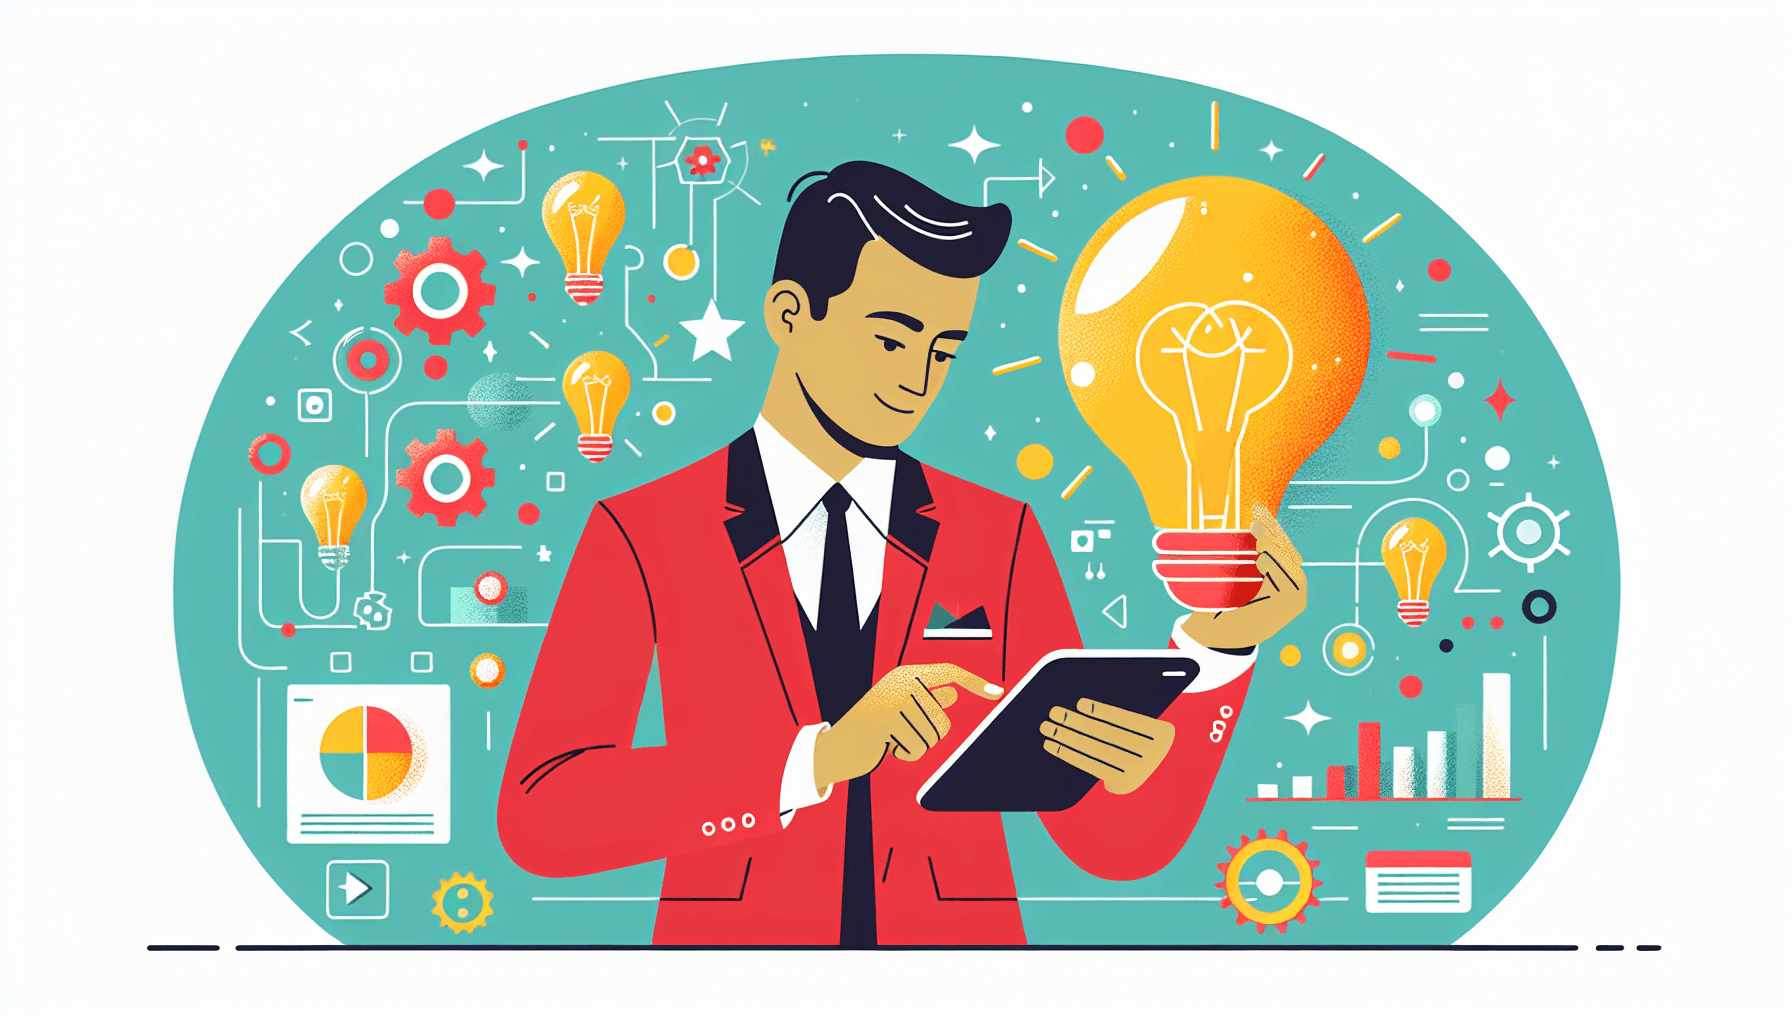 Who is an intrapreneur person? in flat illustration style and white background, red #f47574, green #88c7a8, yellow #fcc44b, and blue #645bc8 colors.